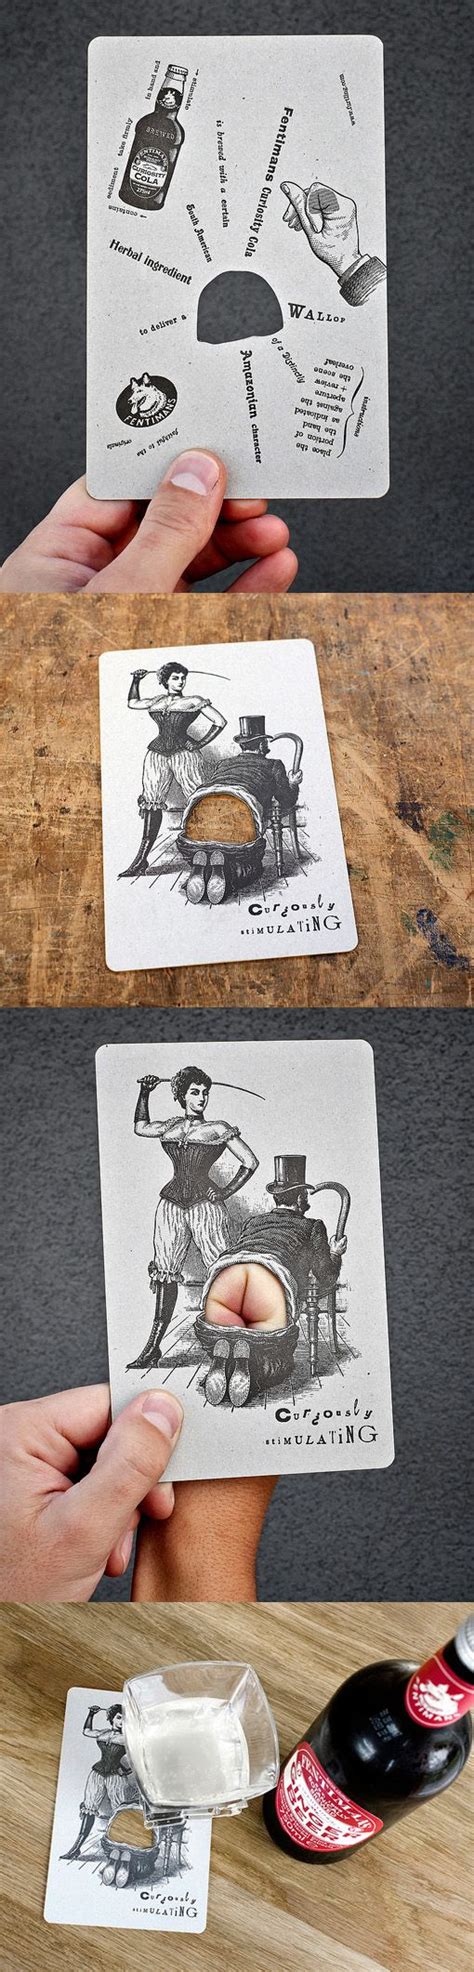 hilariously interactive vintage style letterpress beer coaster business